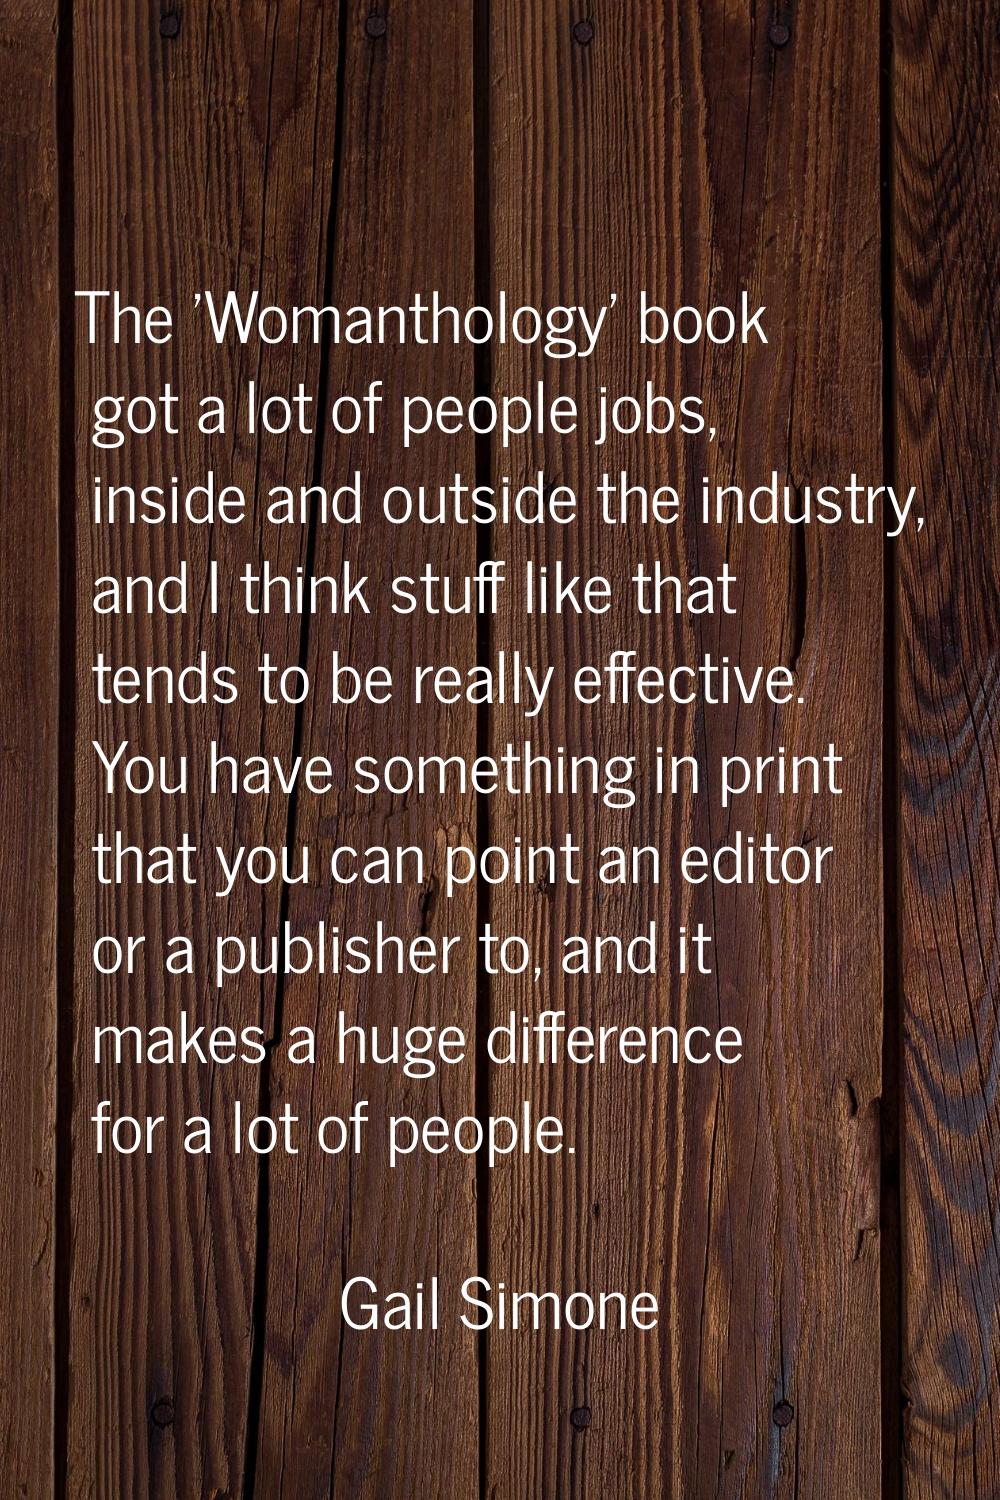 The 'Womanthology' book got a lot of people jobs, inside and outside the industry, and I think stuf